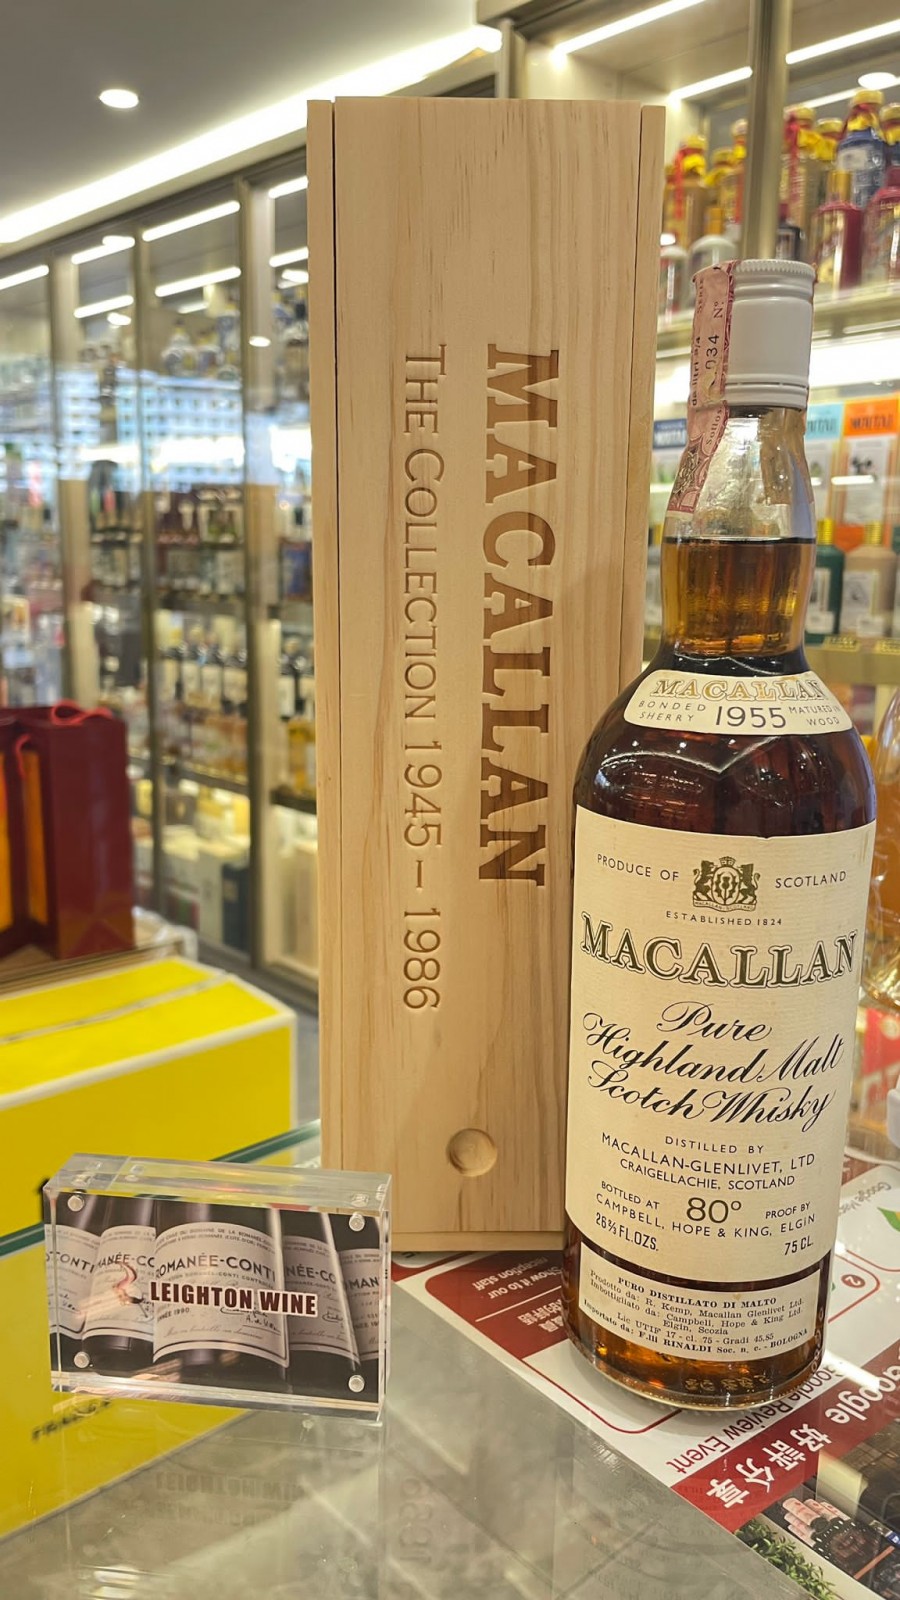 MACALLAN 1955 - 80° PROOF - CAMPBELL HOPE & KING